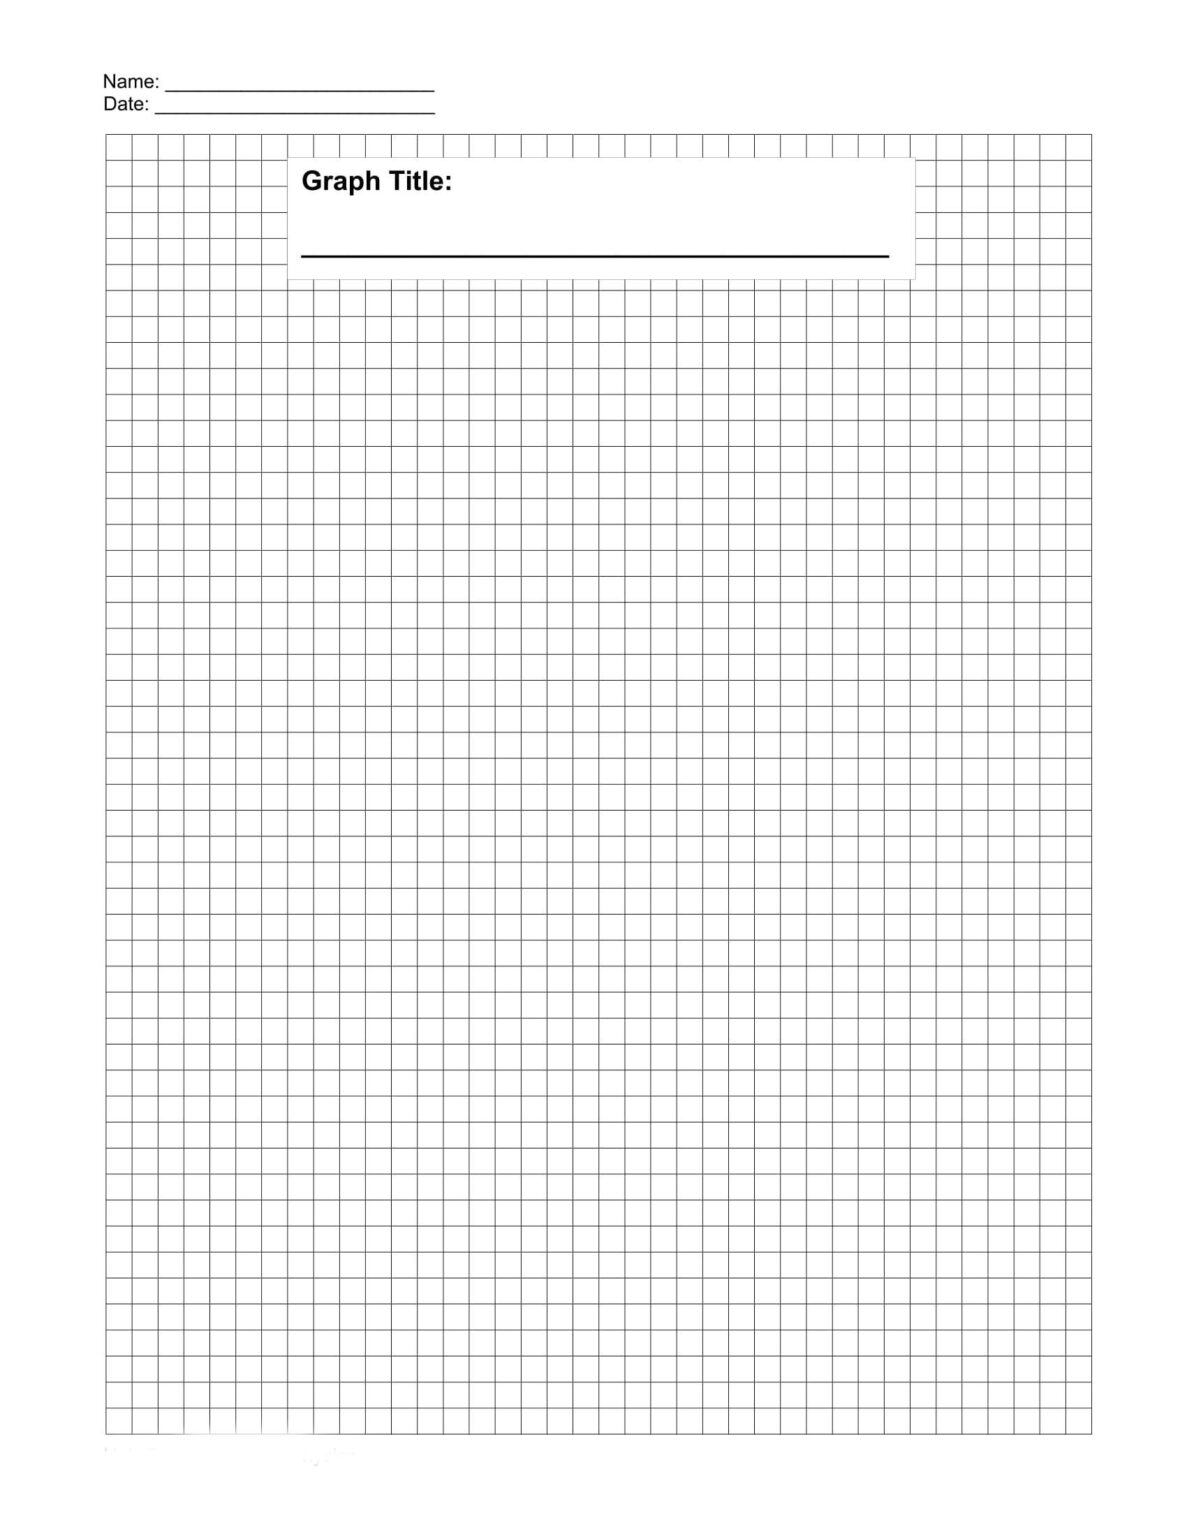 printable-word-search-template-word-search-printables-blank-word